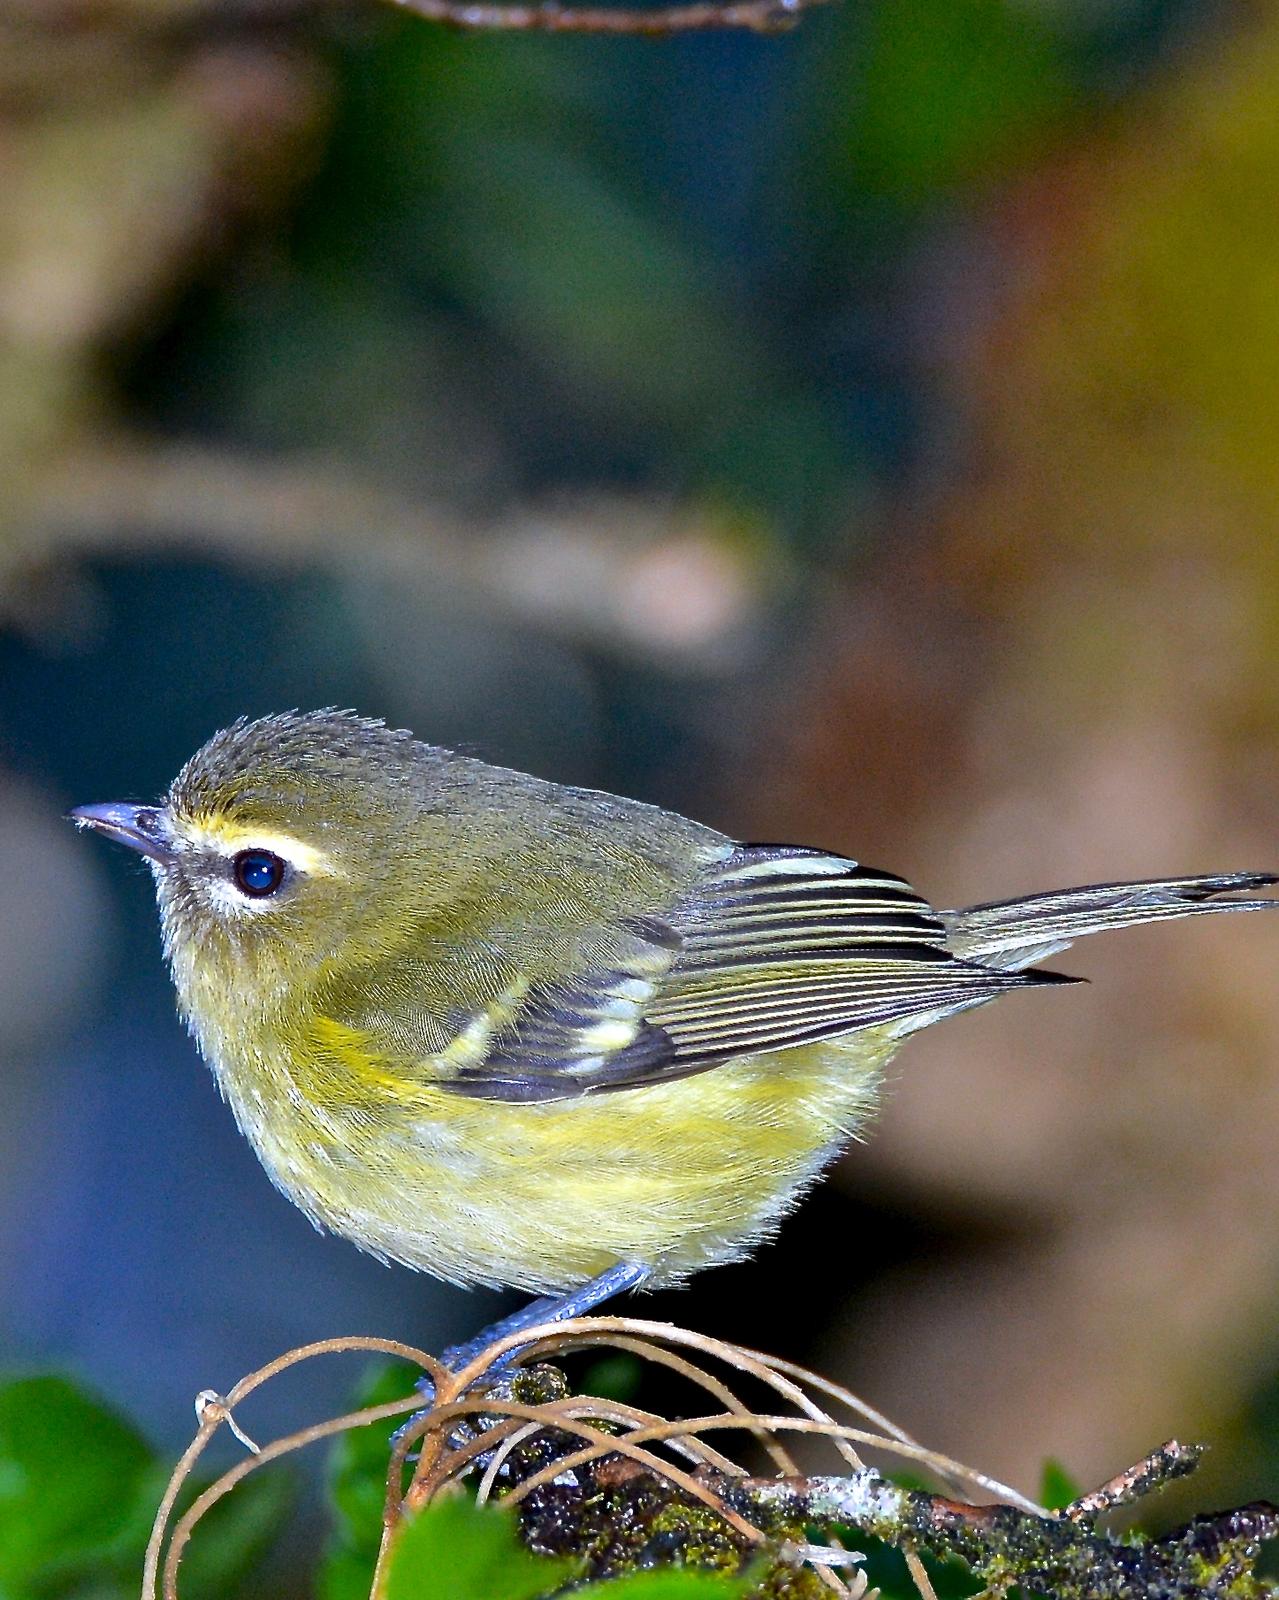 Yellow-winged Vireo Photo by Gerald Friesen